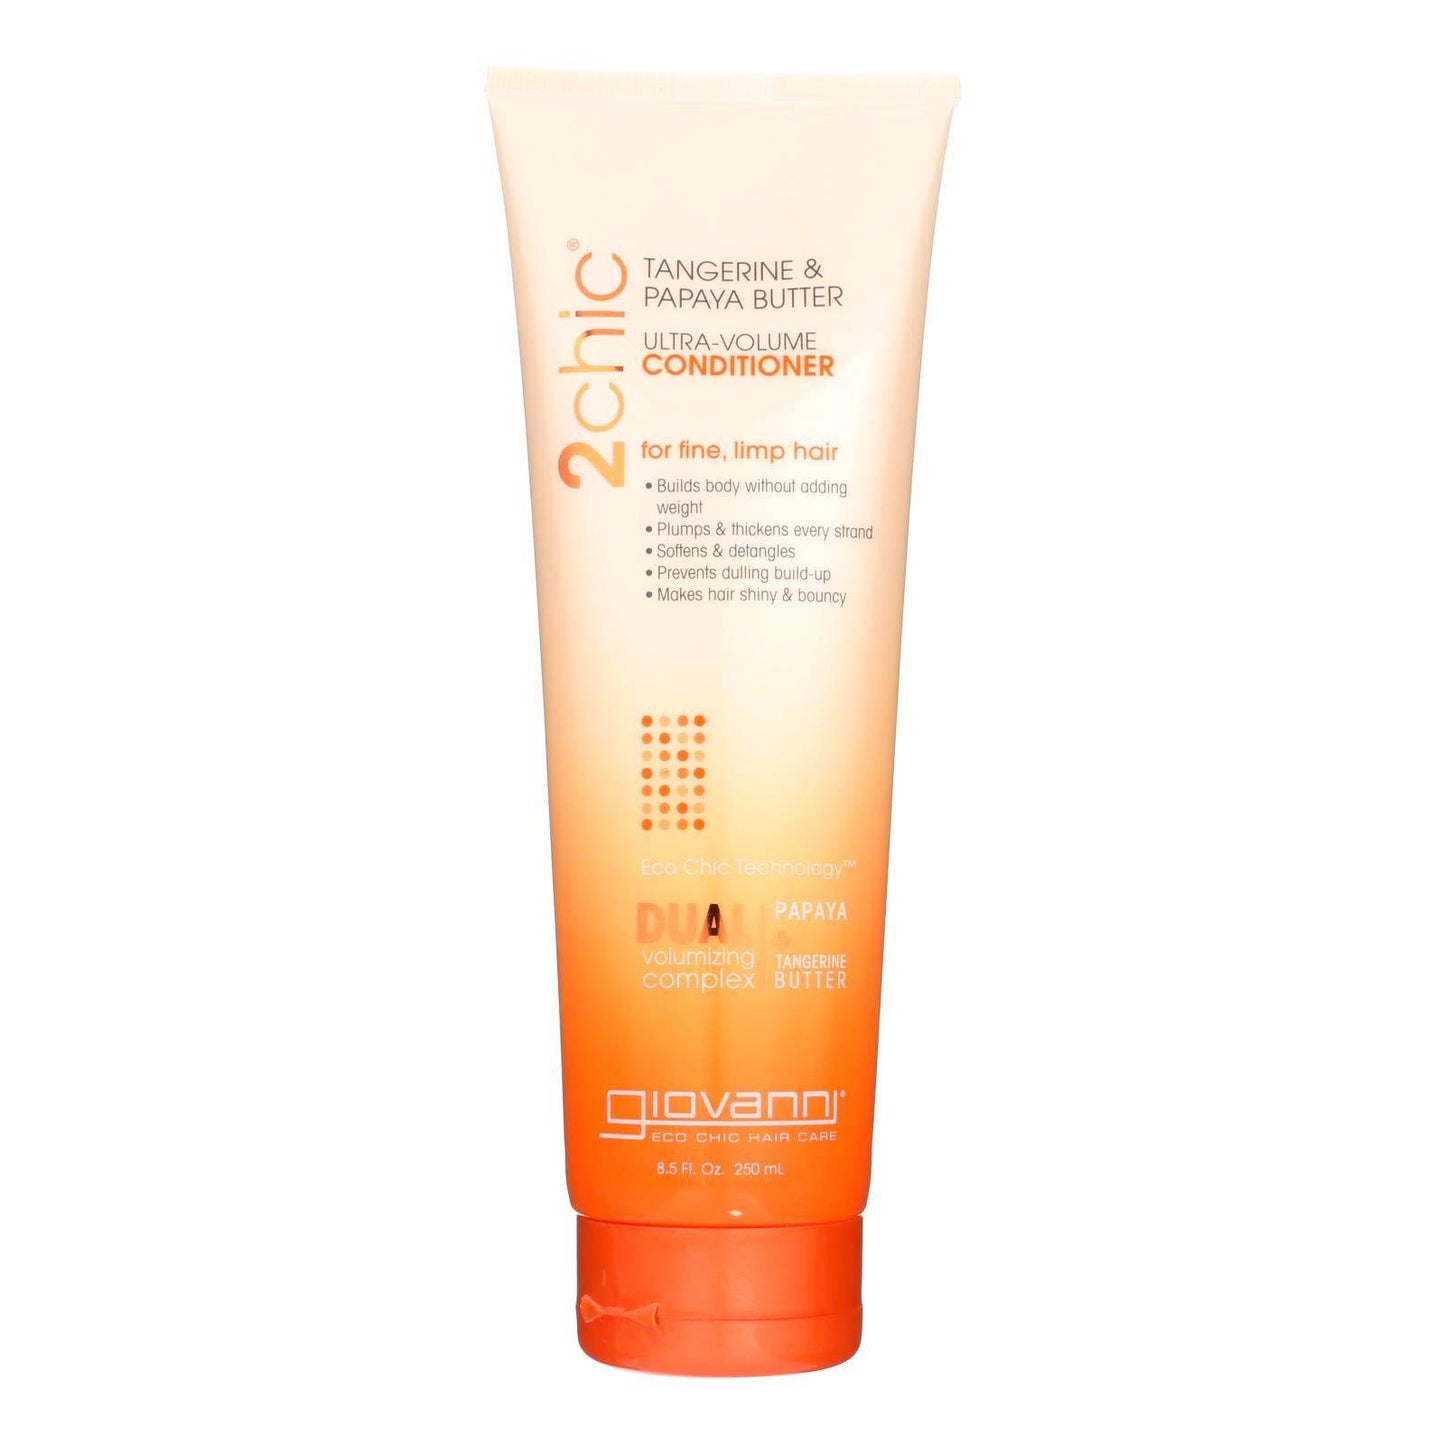 Buy Giovanni Hair Care Products 2chic Conditioner - Ultra-volume Tangerine And Papaya Butter - 8.5 Fl Oz  at OnlyNaturals.us